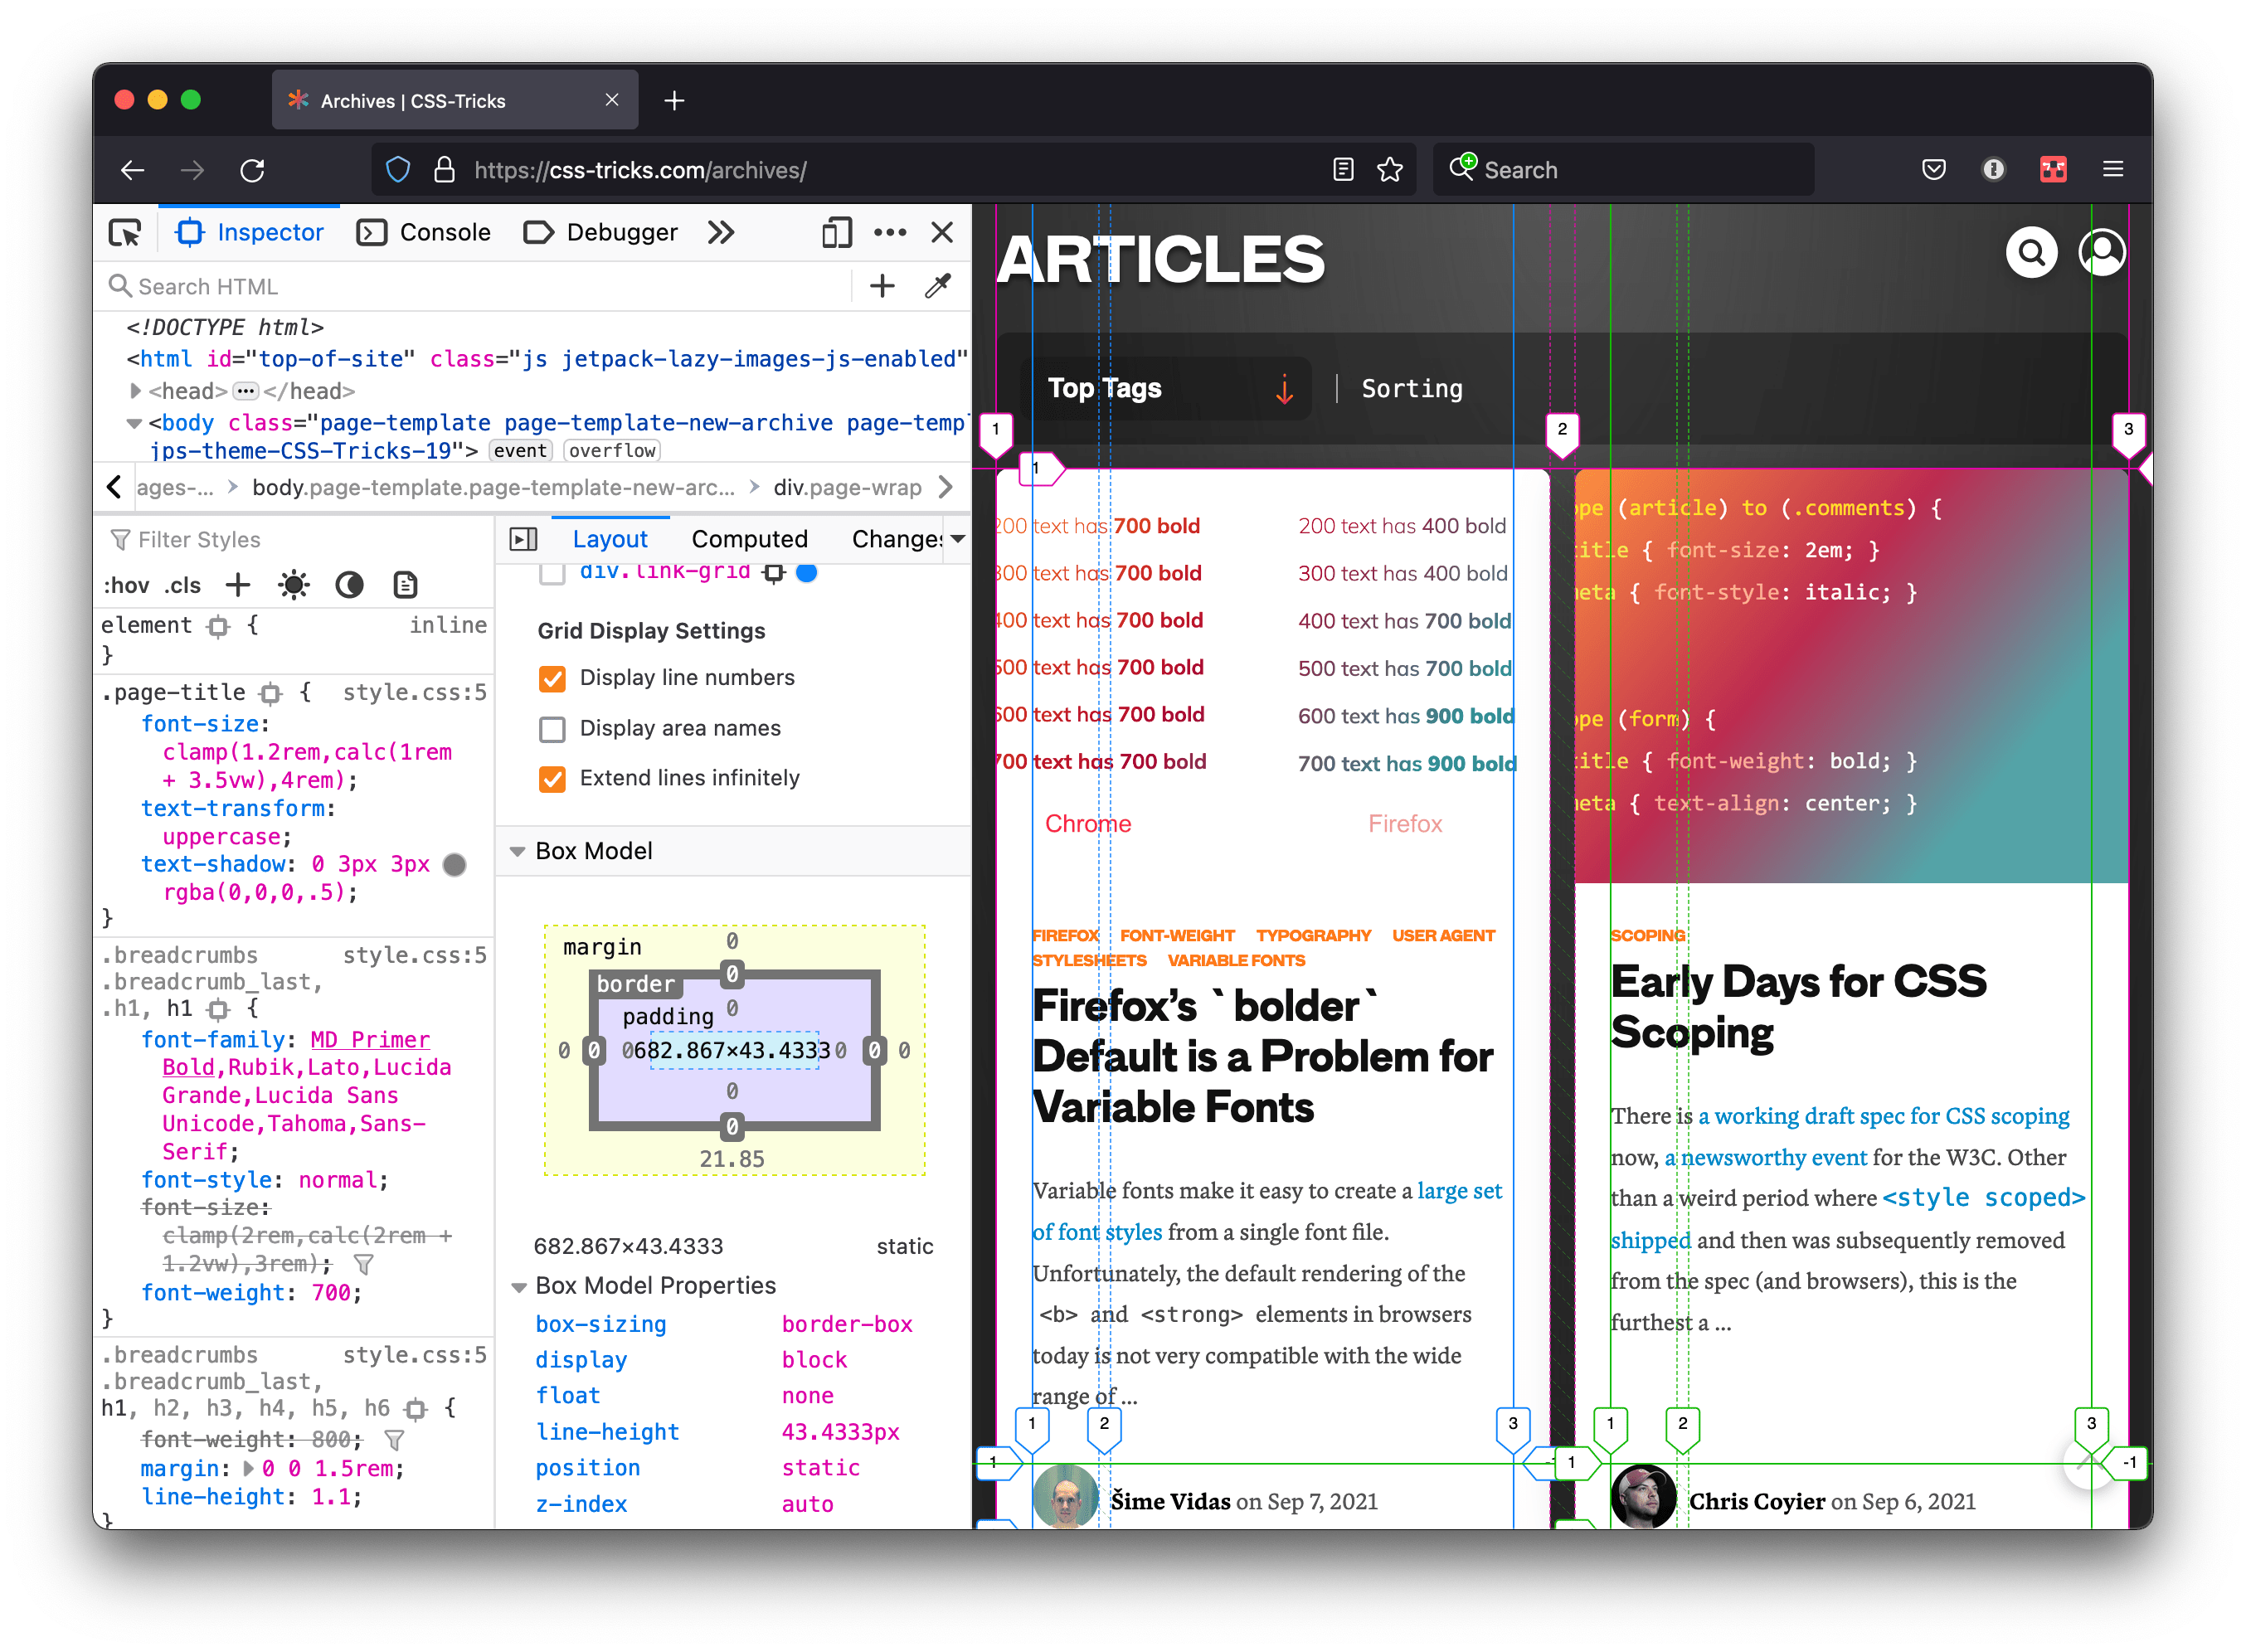 The CSS-Tricks site with DevTools open and docked to the left of the viewport in Firefox. DevTools displays Grid Inspector options and the page contains borders around elements in blue and green to indicate grid track lines.